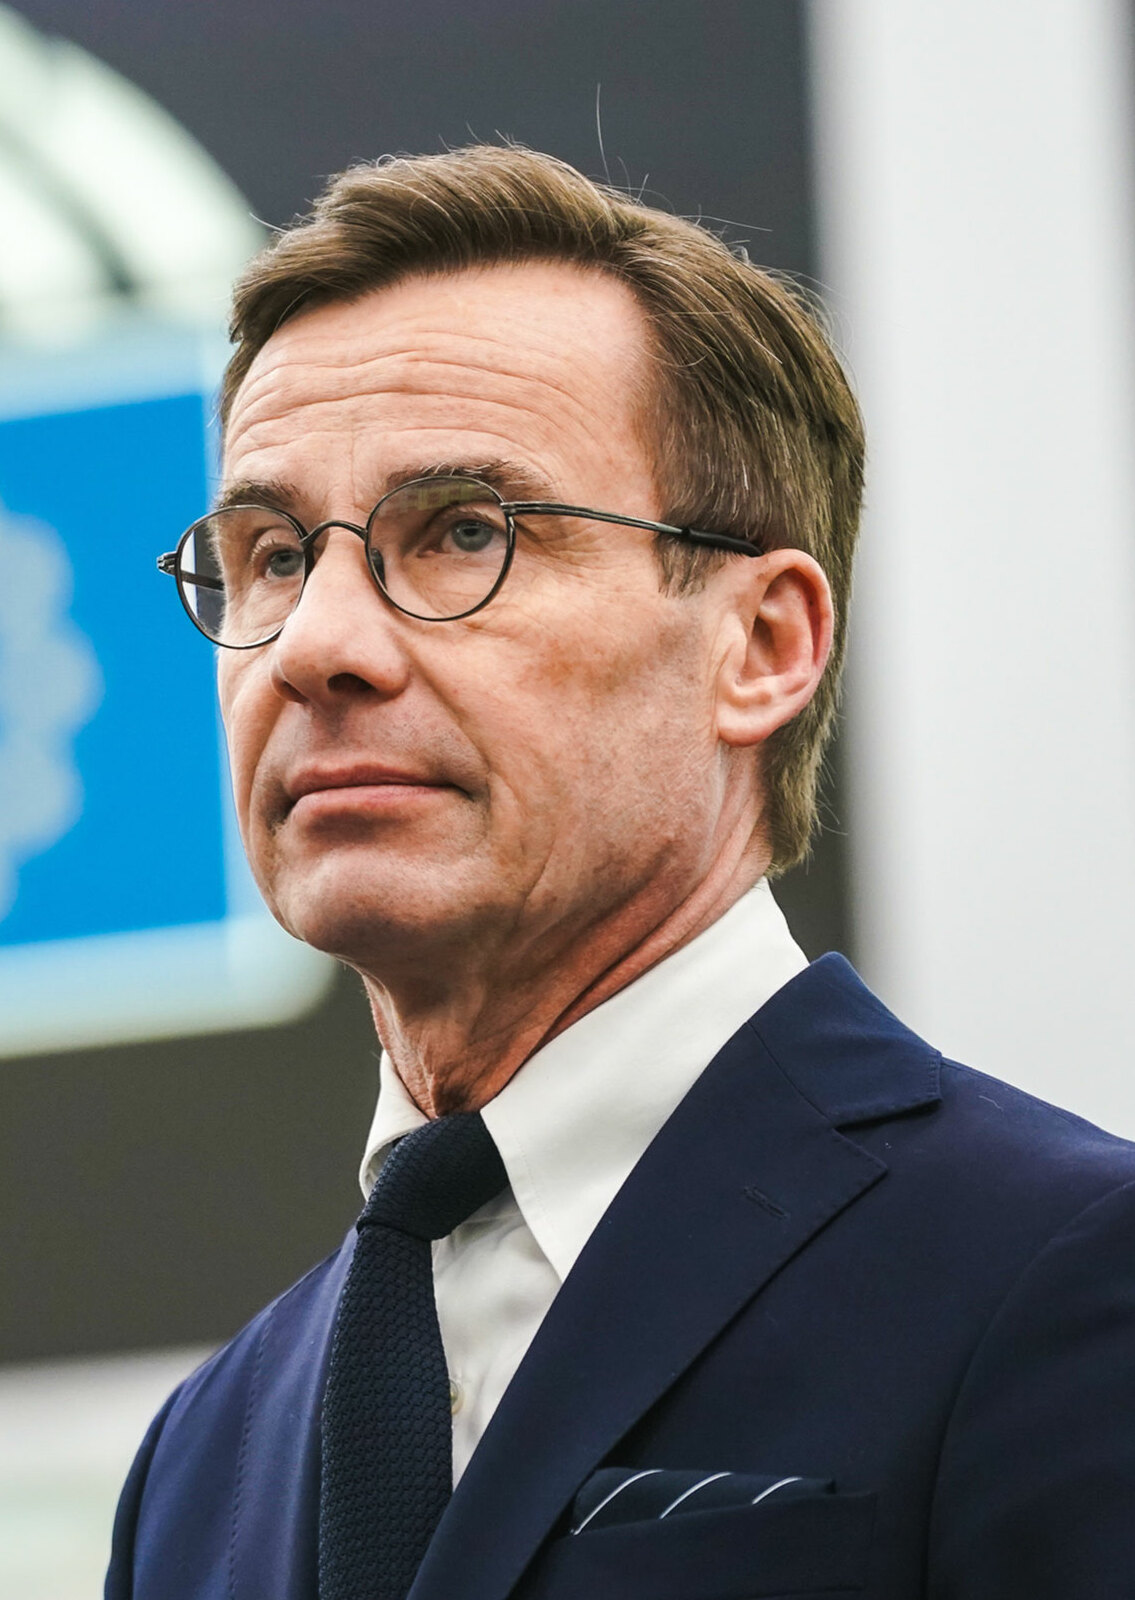 Swedish PM says probability Finland joins NATO before Sweden has increased